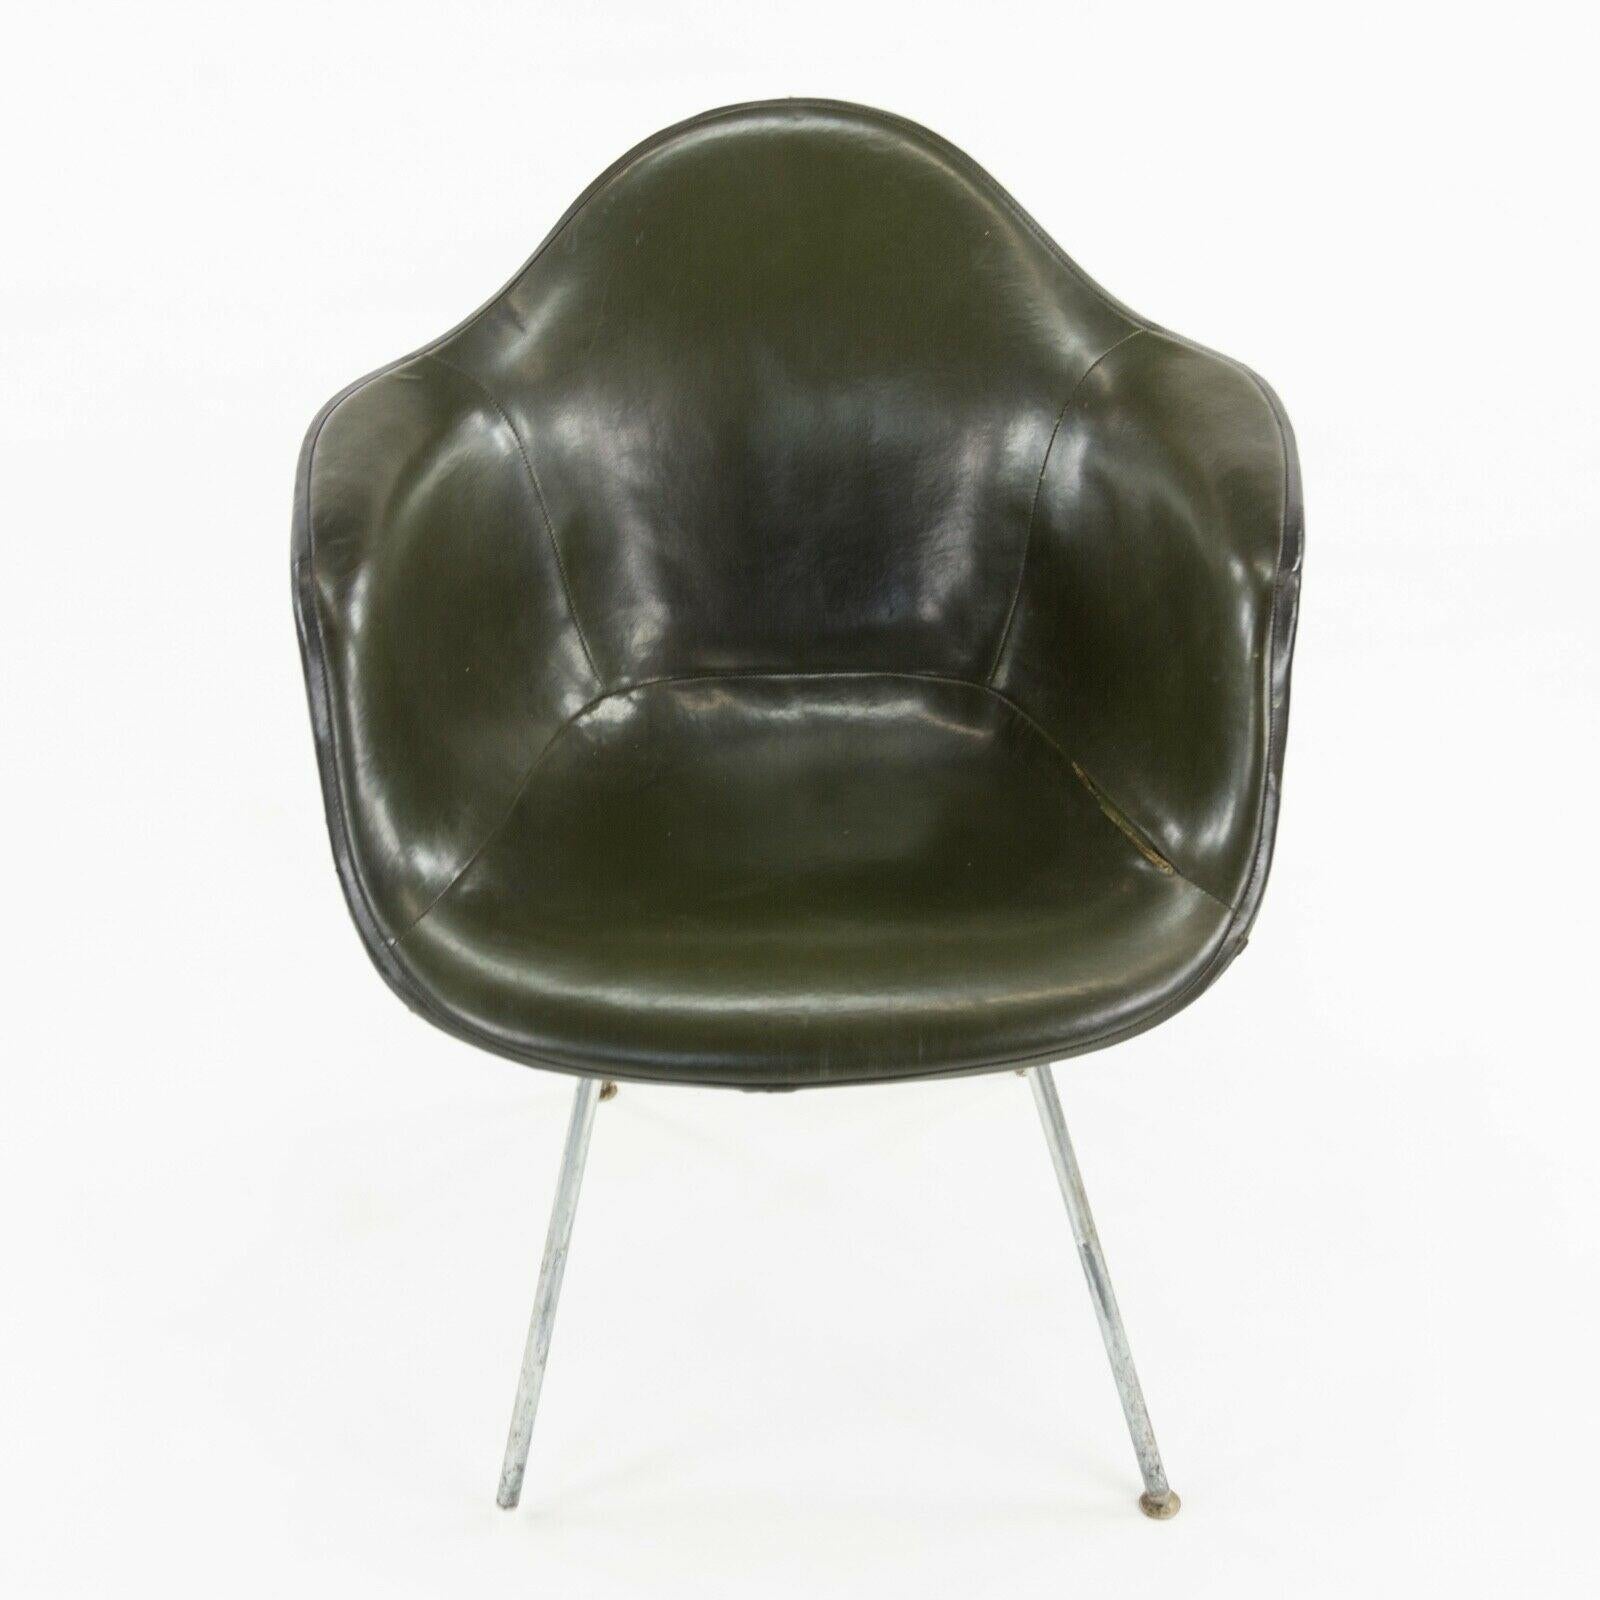 1959 Herman Miller Eames DAX Fiberglass Arm Shell Chair with Green Removable Pad For Sale 5